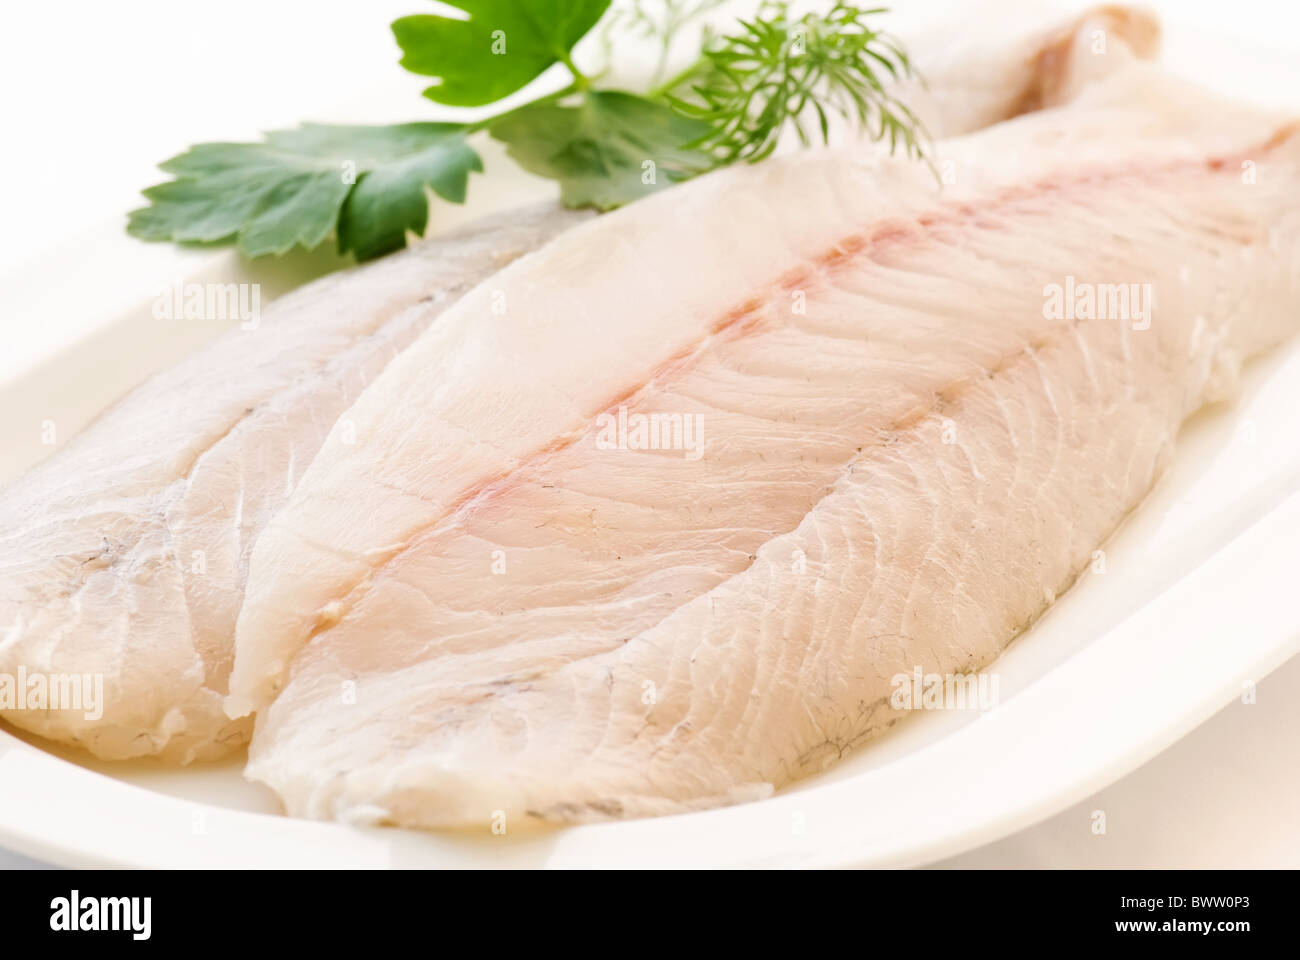 Raw pangasius filet with parsley as closeup on a white plate Stock Photo